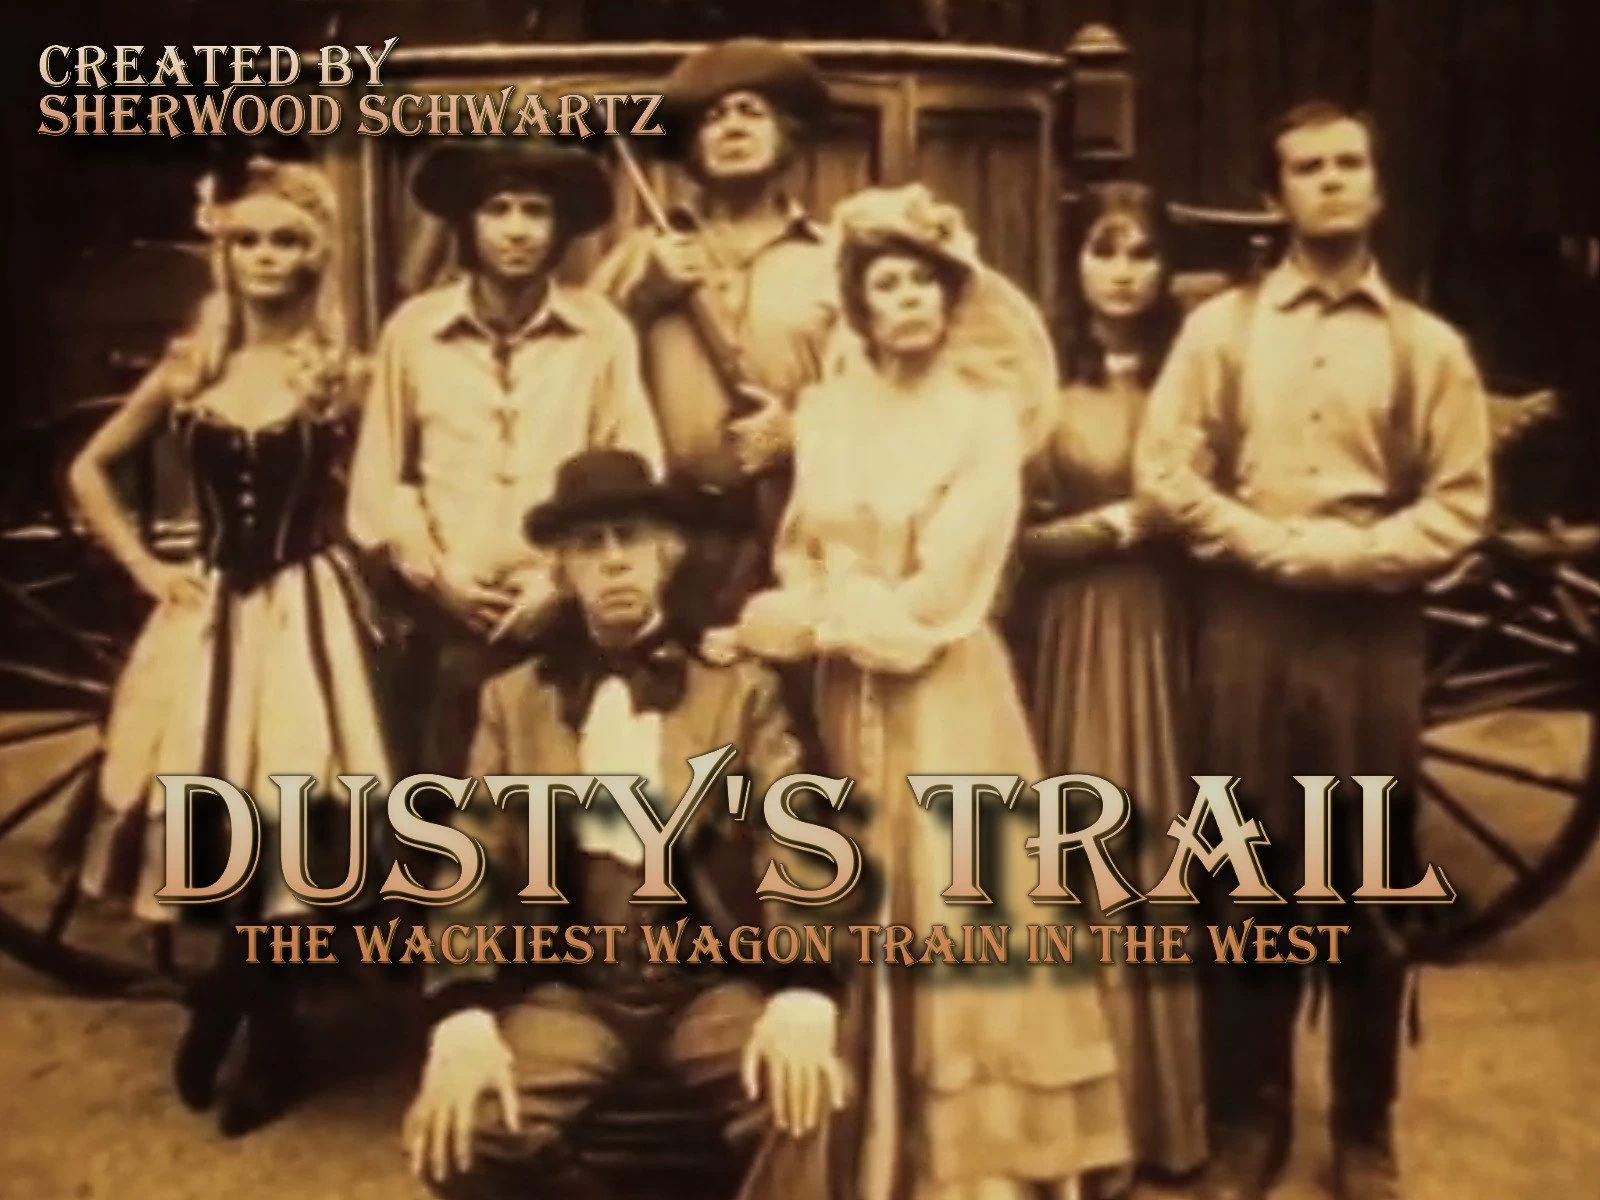 After Gilligan's Island went off the air, Bob Denver later followed up with a TV western, "Dusty's Trail."